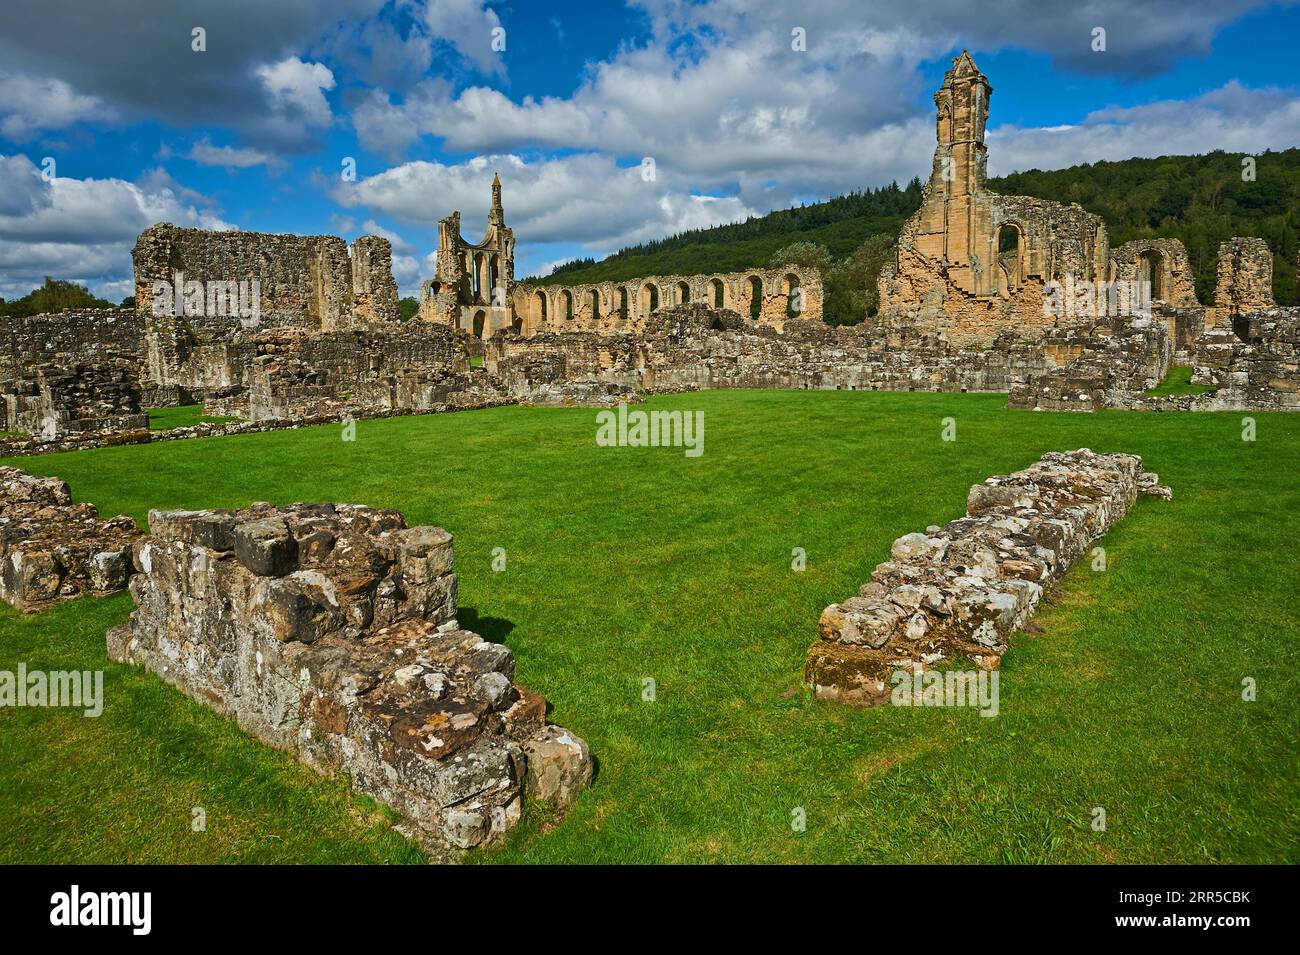 Byland Abbey ruins, Grade 1 listed Cistercian Abbey in Rydale, North Yorkshire is an historic ruin in the North Yorkshire Moors National Park Stock Photo